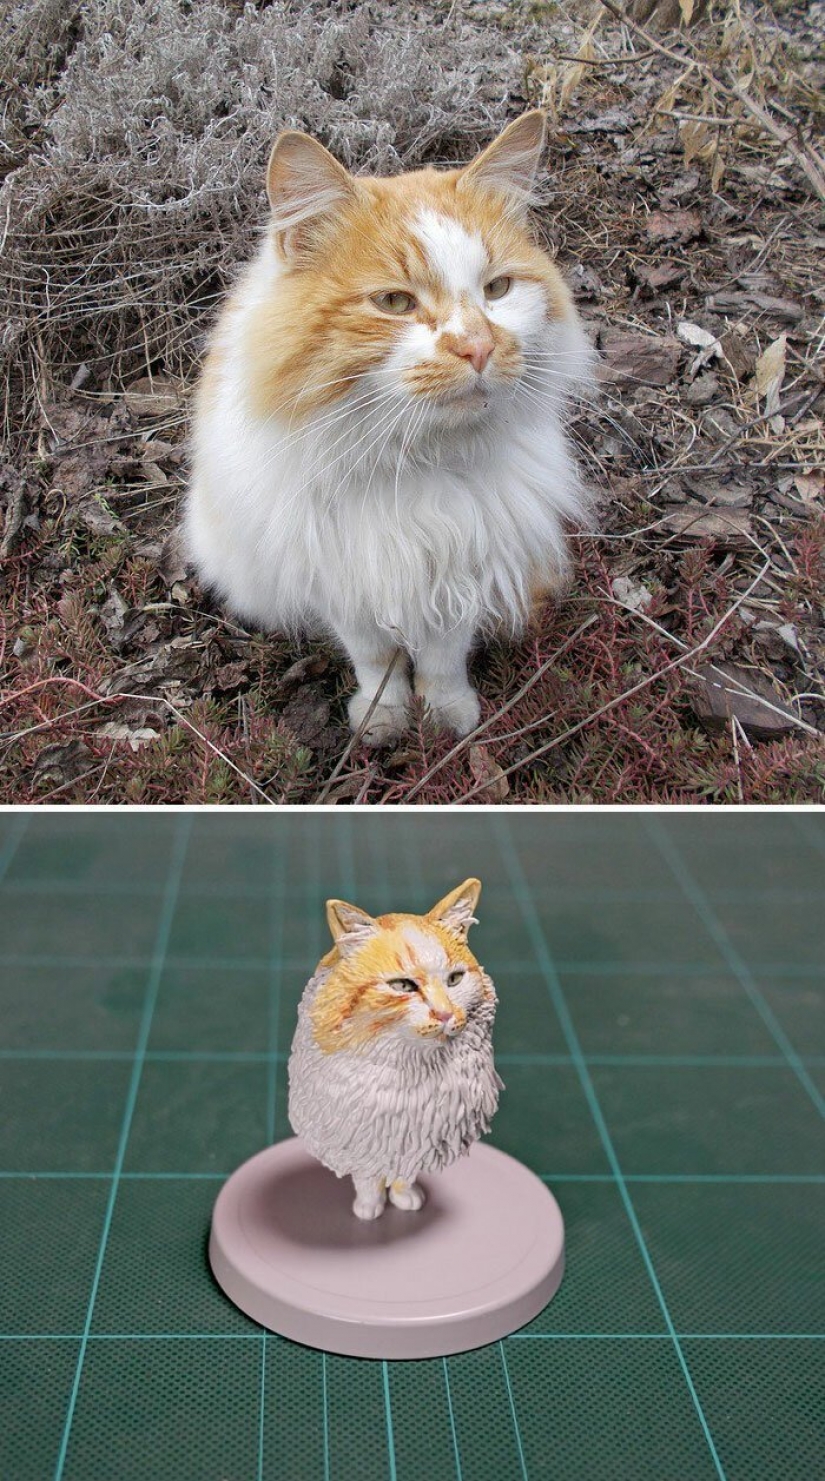 The artist creates figures of animals on the funny Internet meme